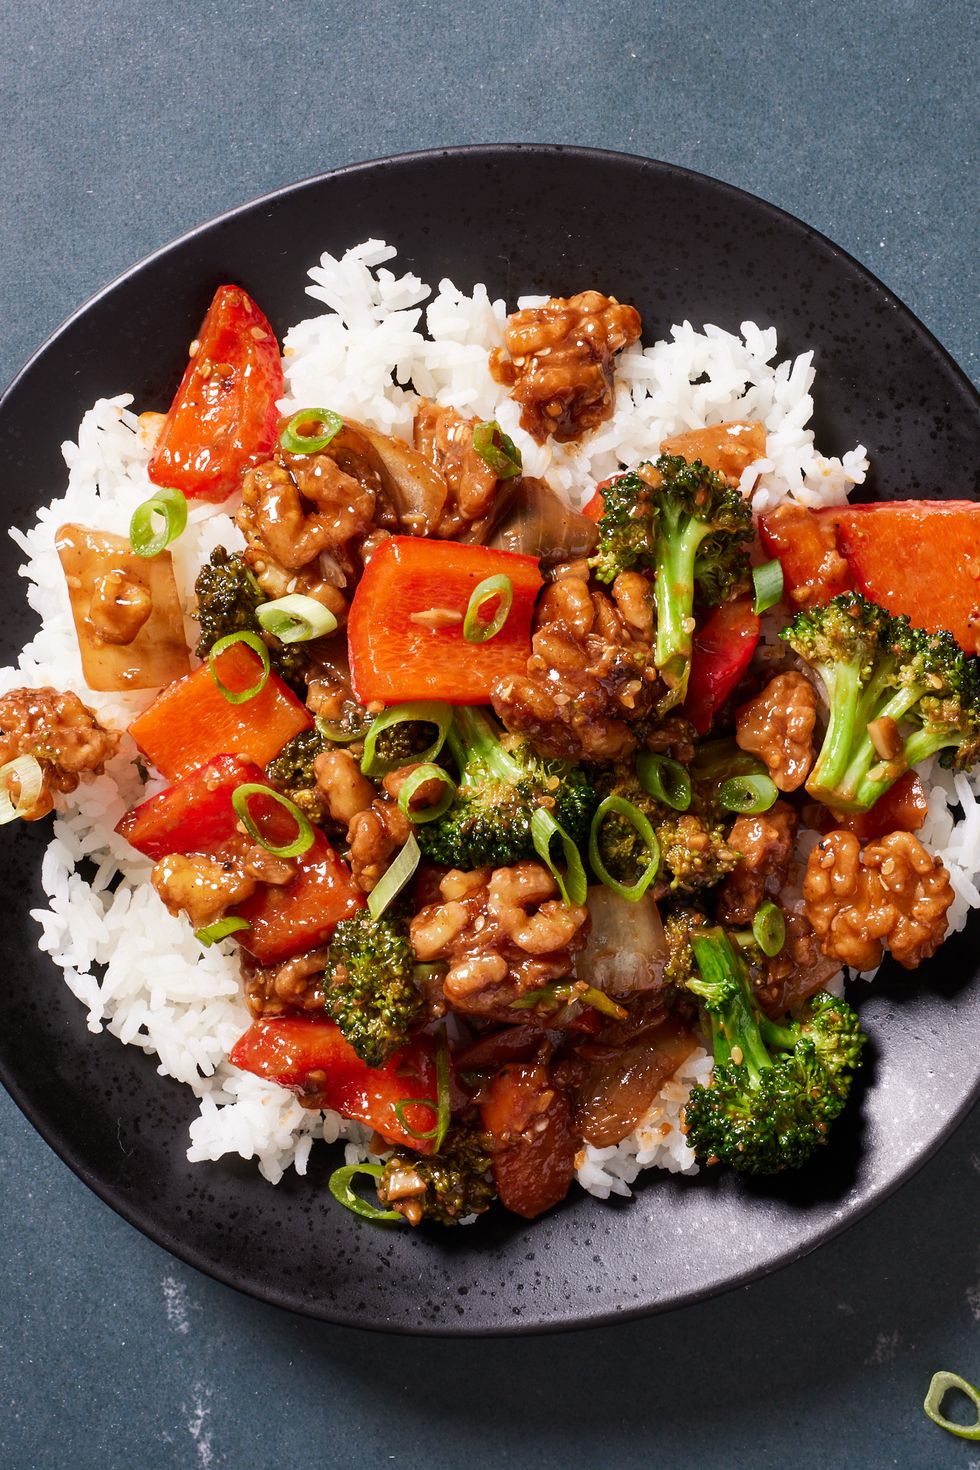 walnut broccoli stirfry on white rice with red bell peppers and glazy sauce